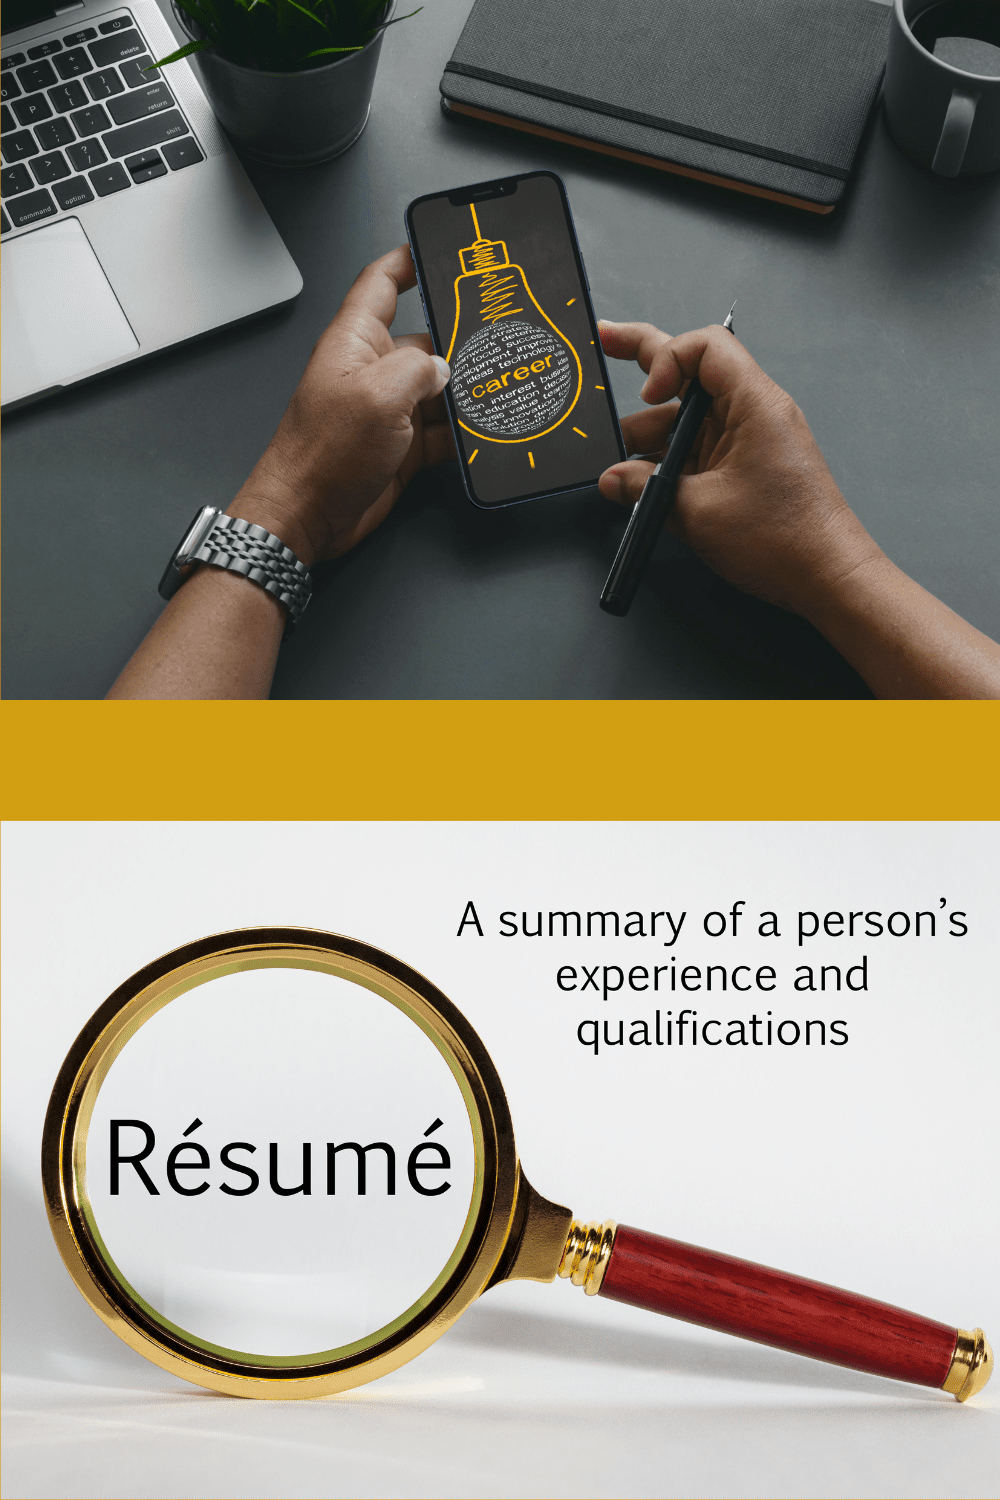 What is the cutoff for old information on resumes?